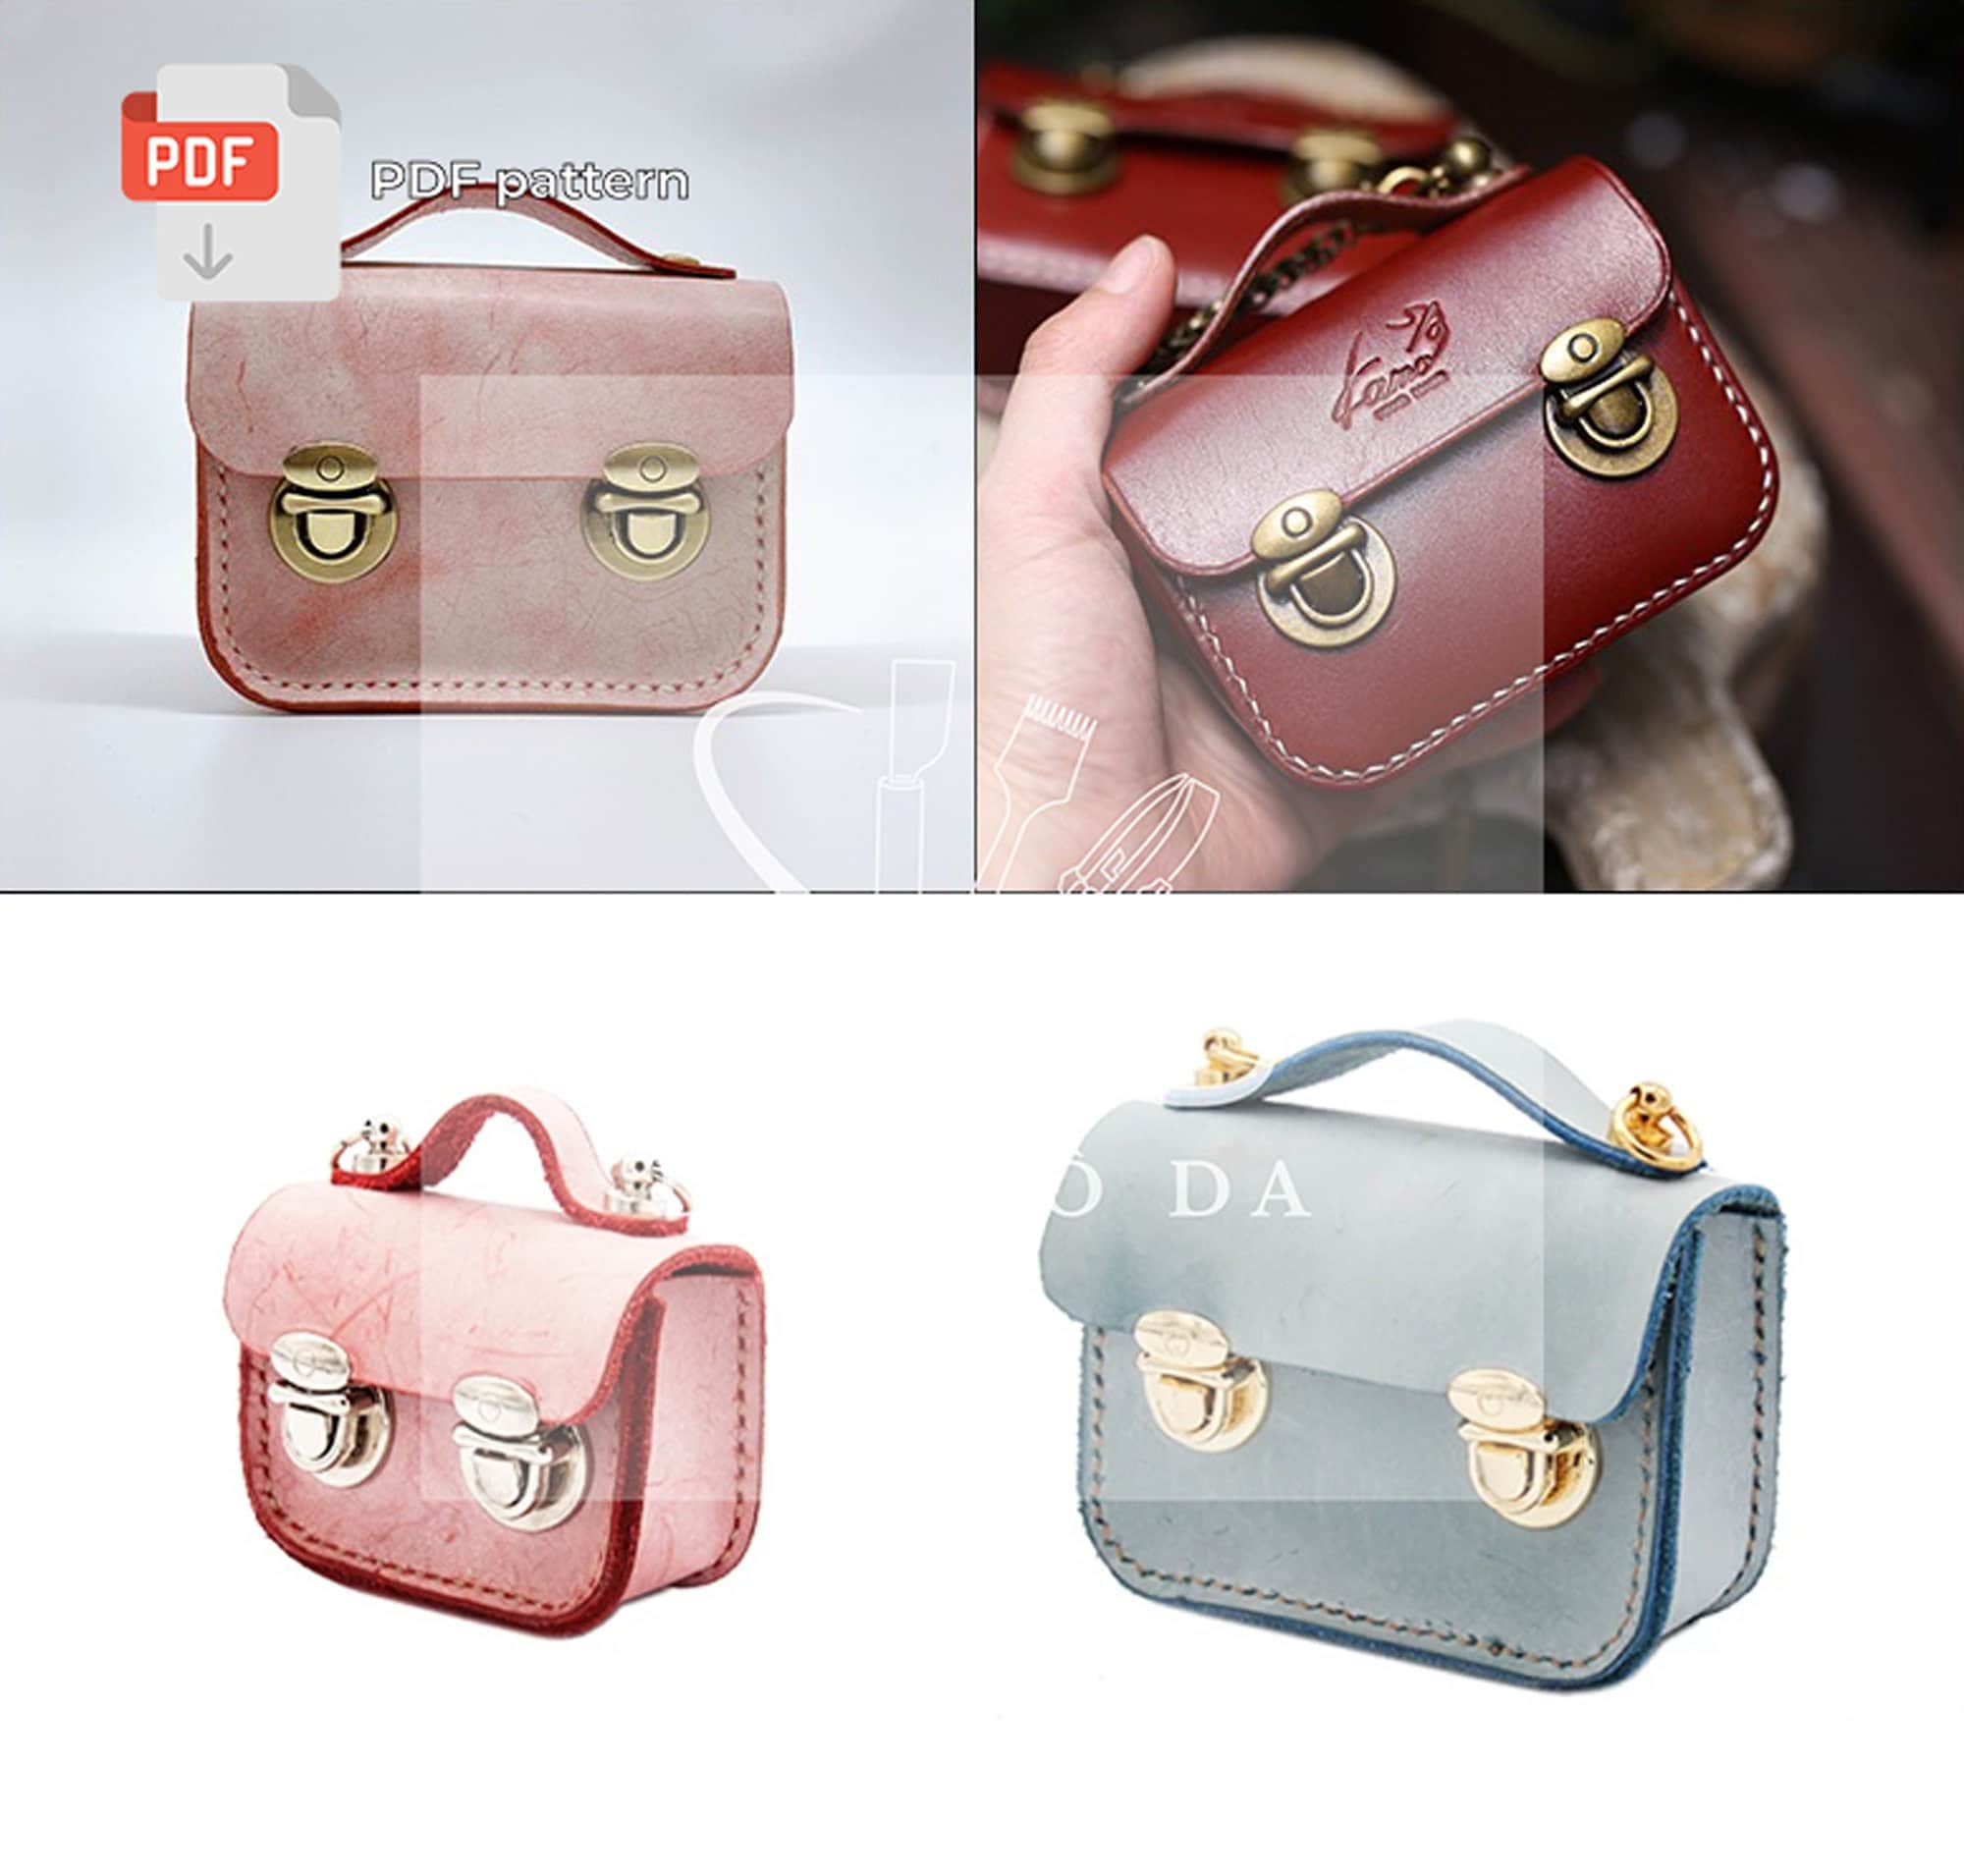 BESTOYARD Leather Coin Purse Change Holder Heart Shaped Coin Bag Change  Pouch with Zipper Coin Pouch Change Wallet Handbag Pendant Charms for Party